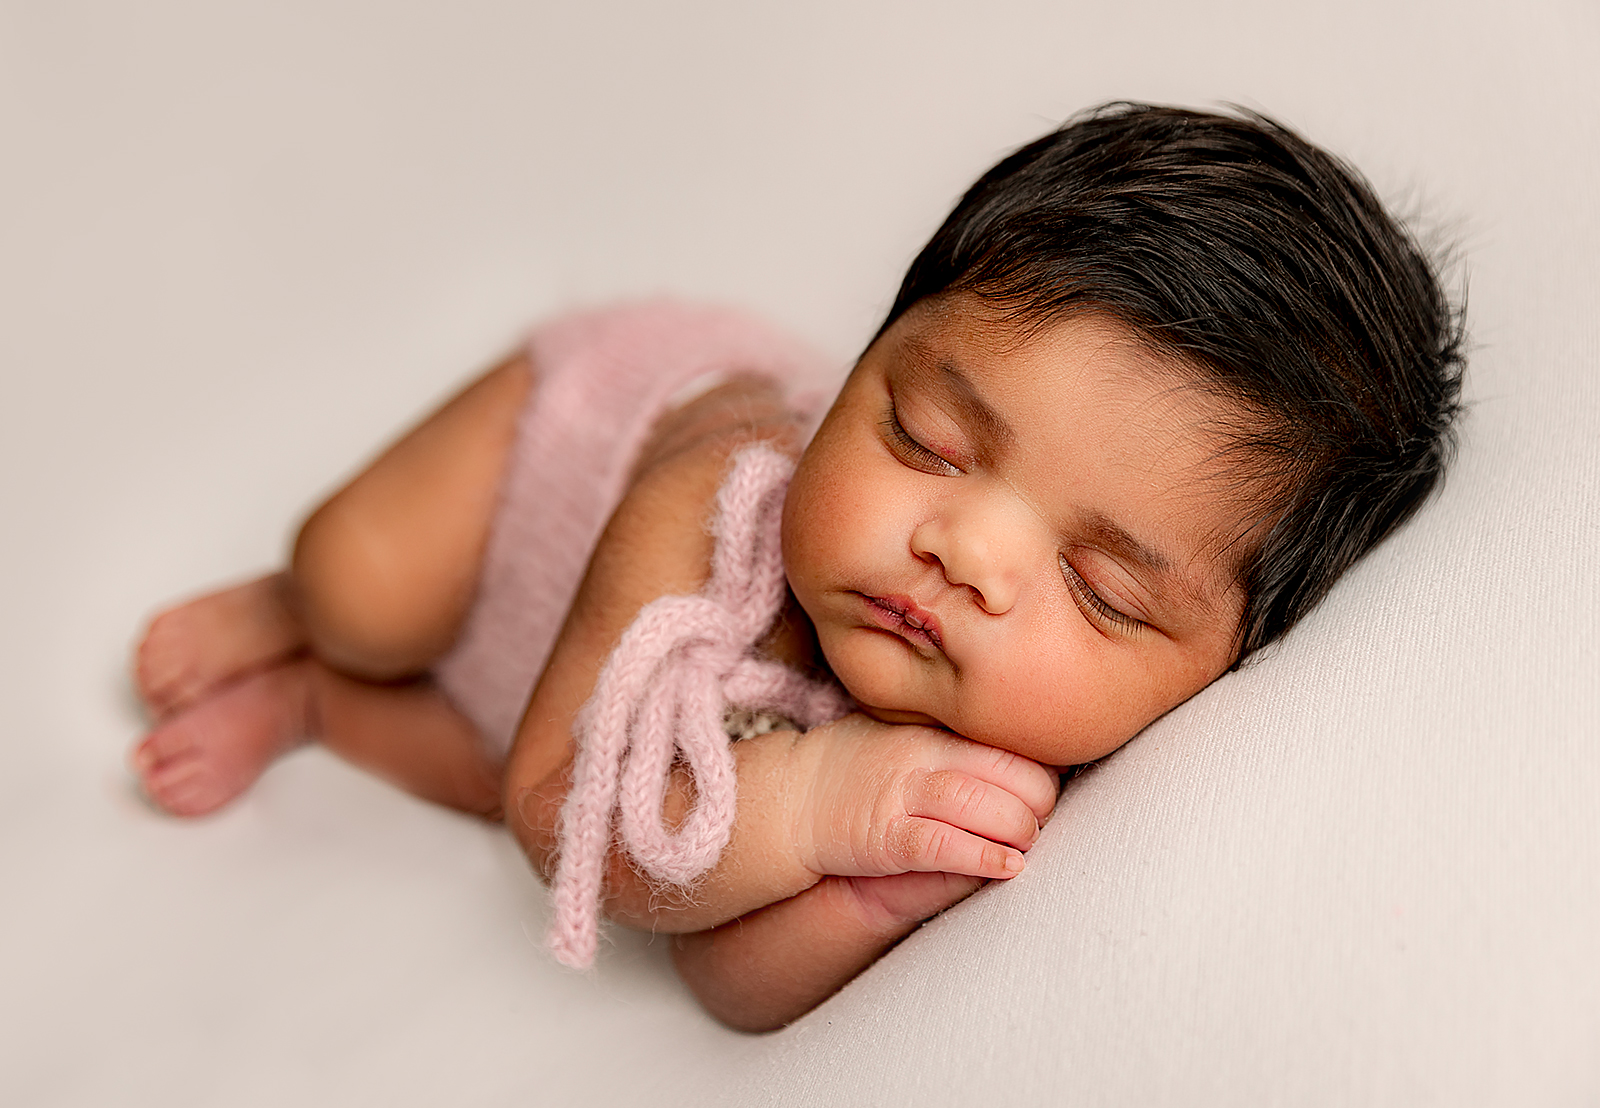 Newborn Baby Care: After Care at Home